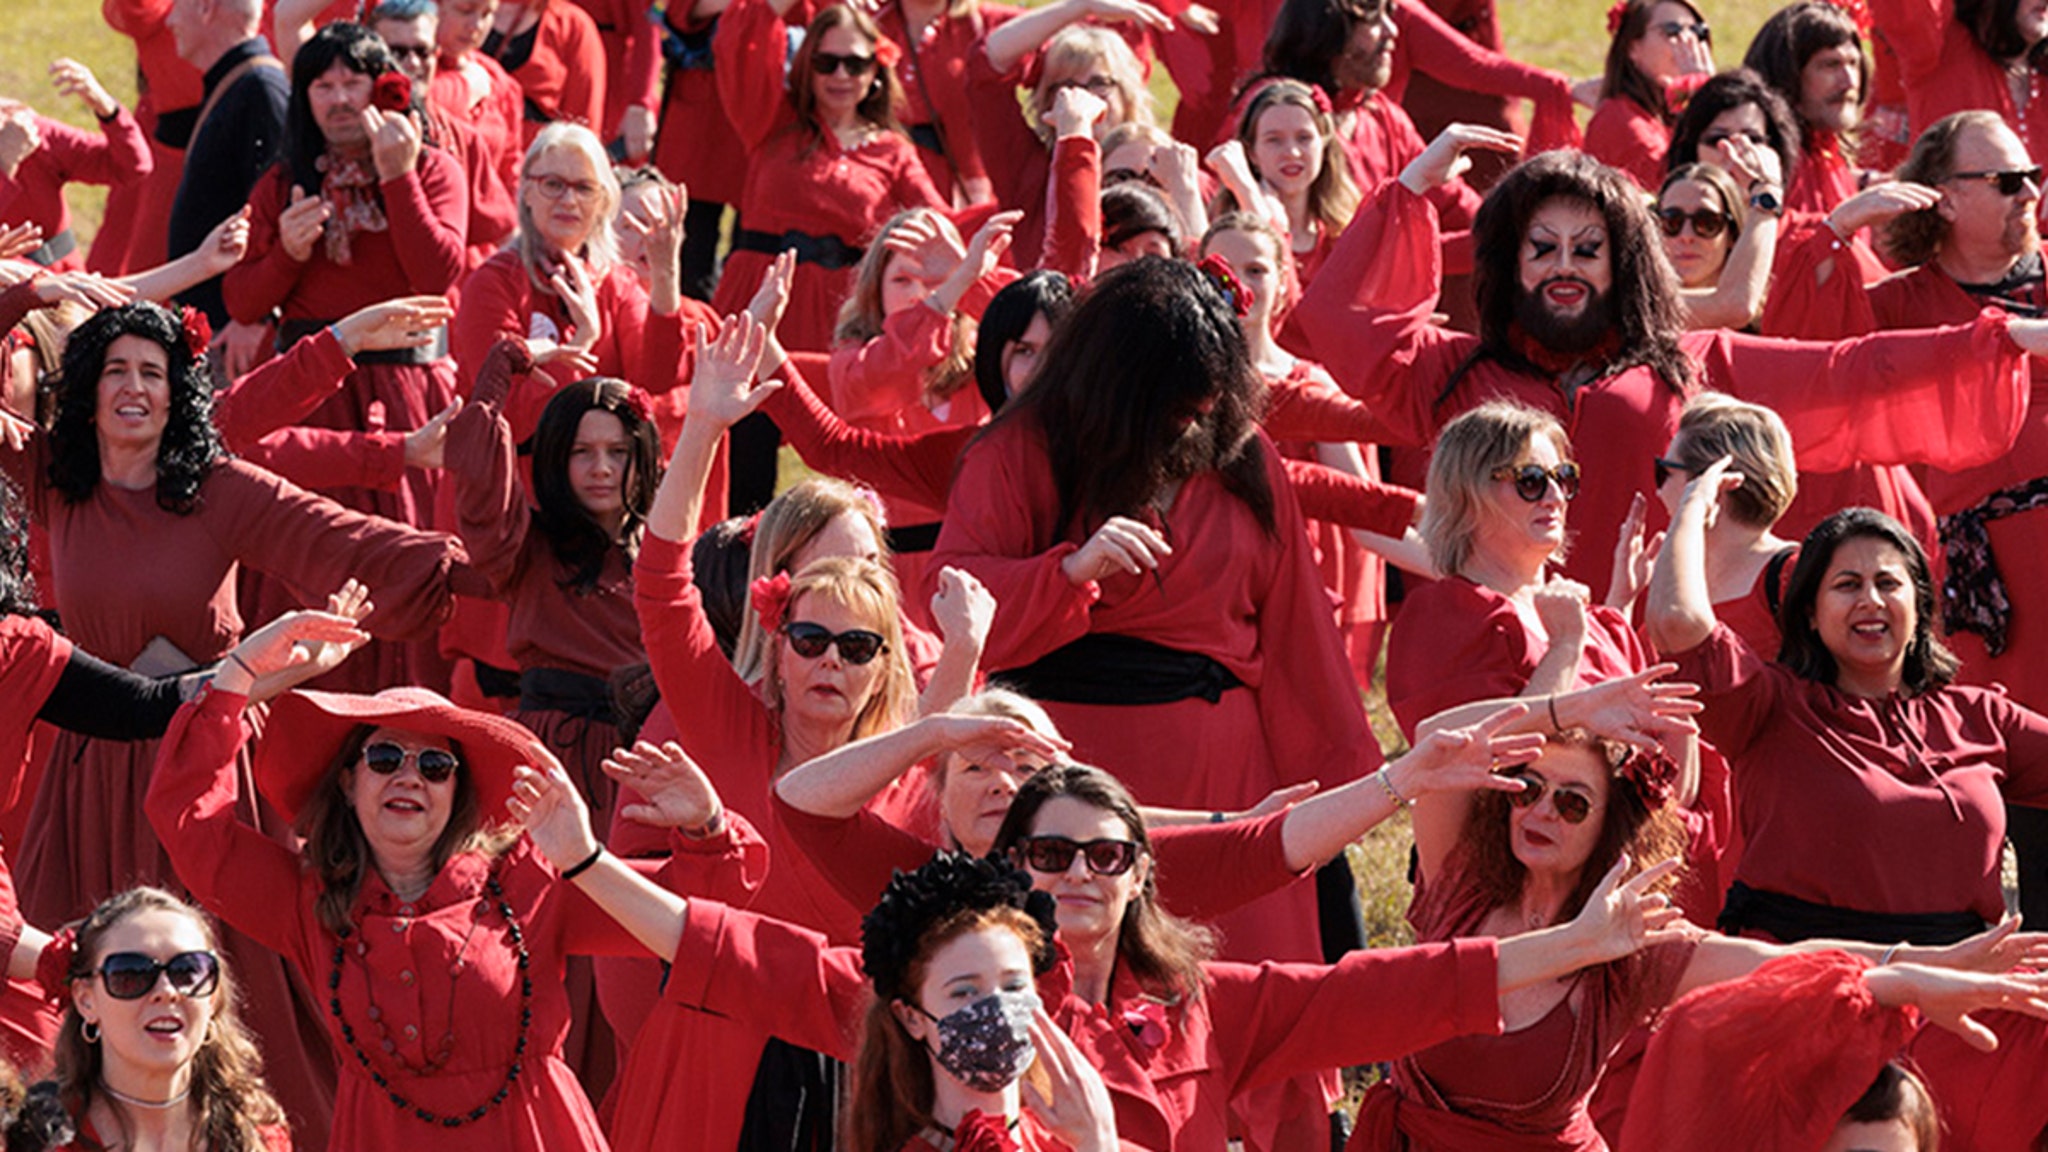 Kate Bush fans gather en masse for Wuthering Heights Day and dance in red